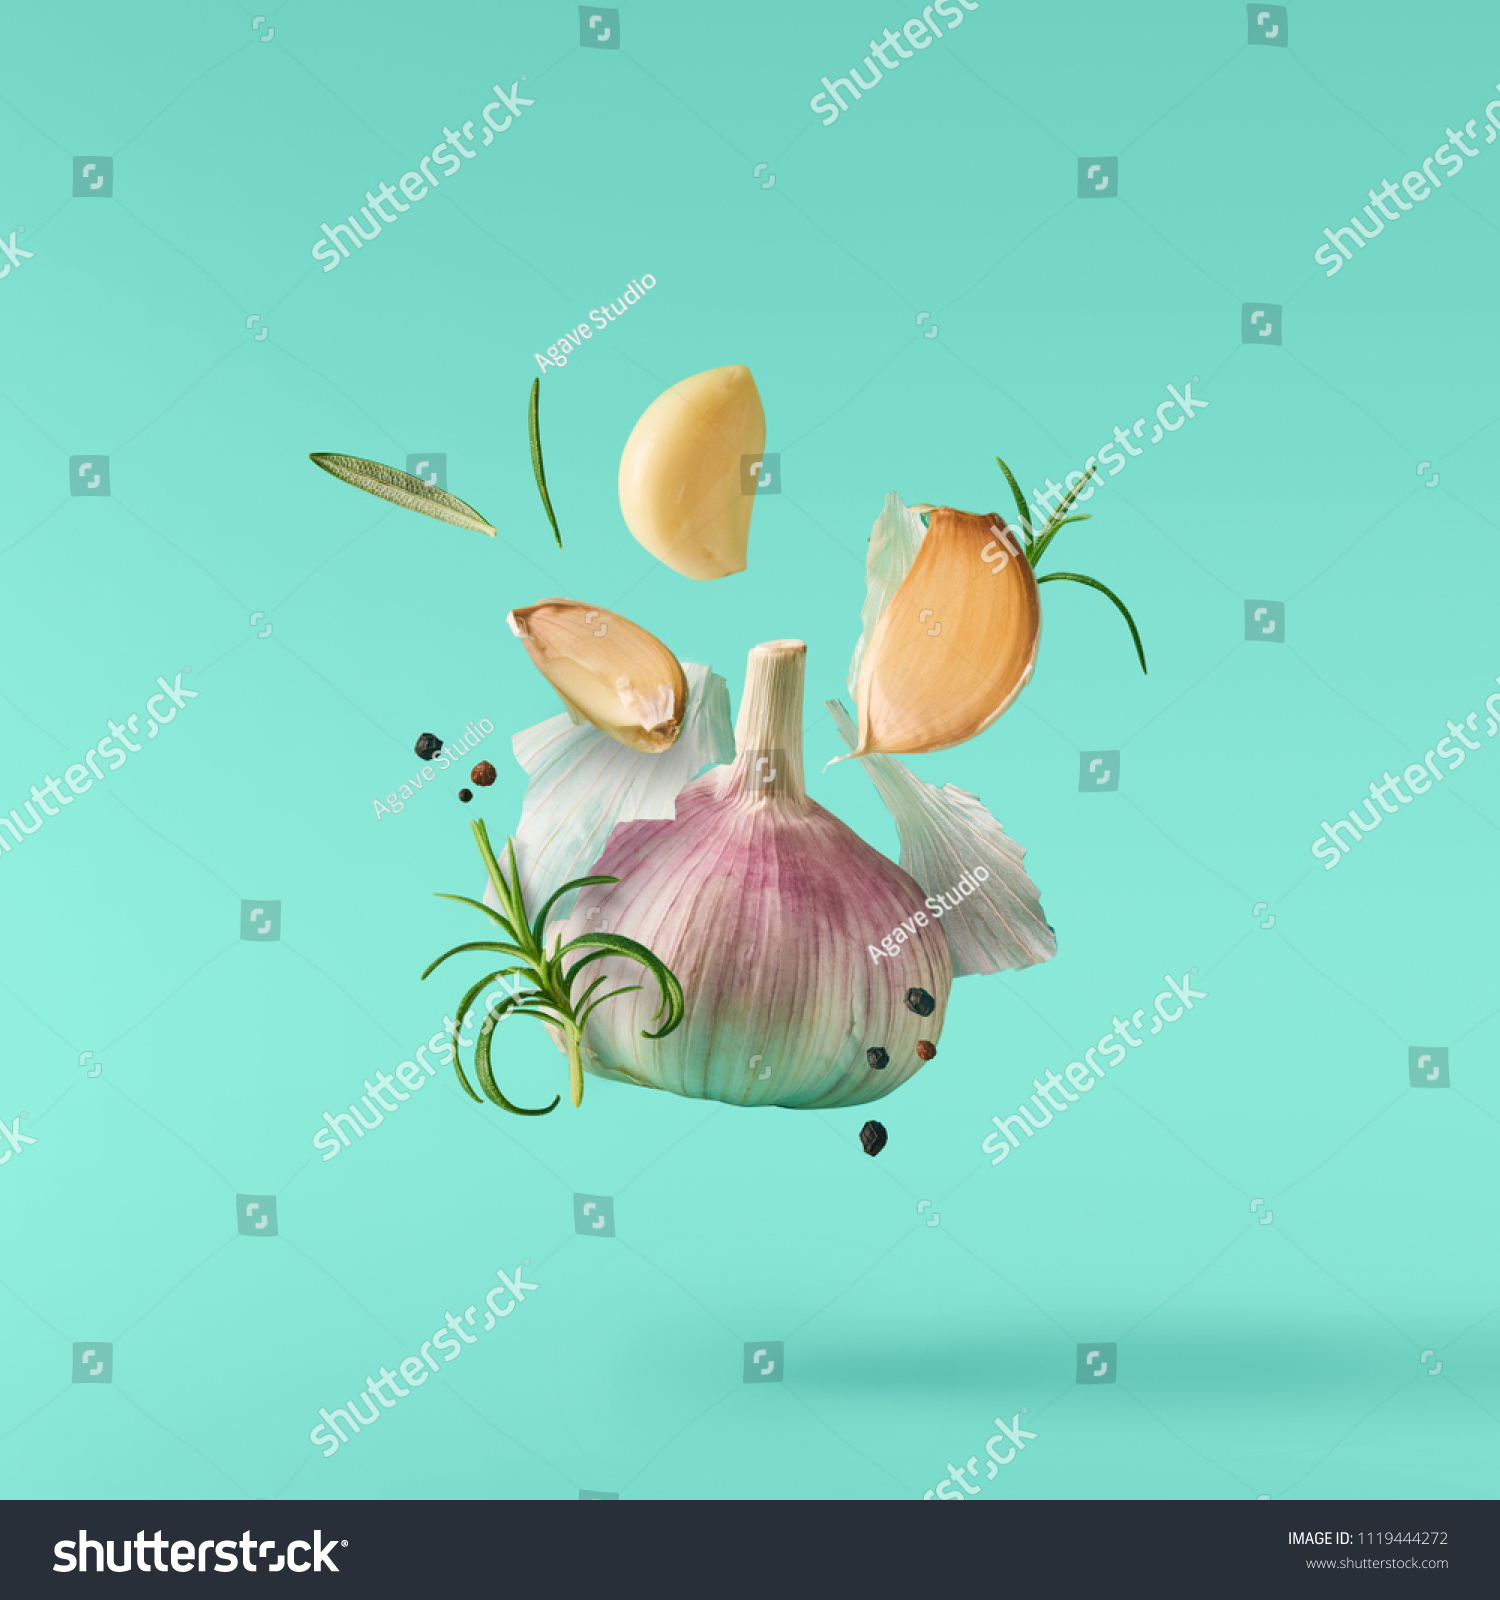 Garlic falling in air with pepper and herbs like rosemary on turquoise background. Spicy food concept #1119444272